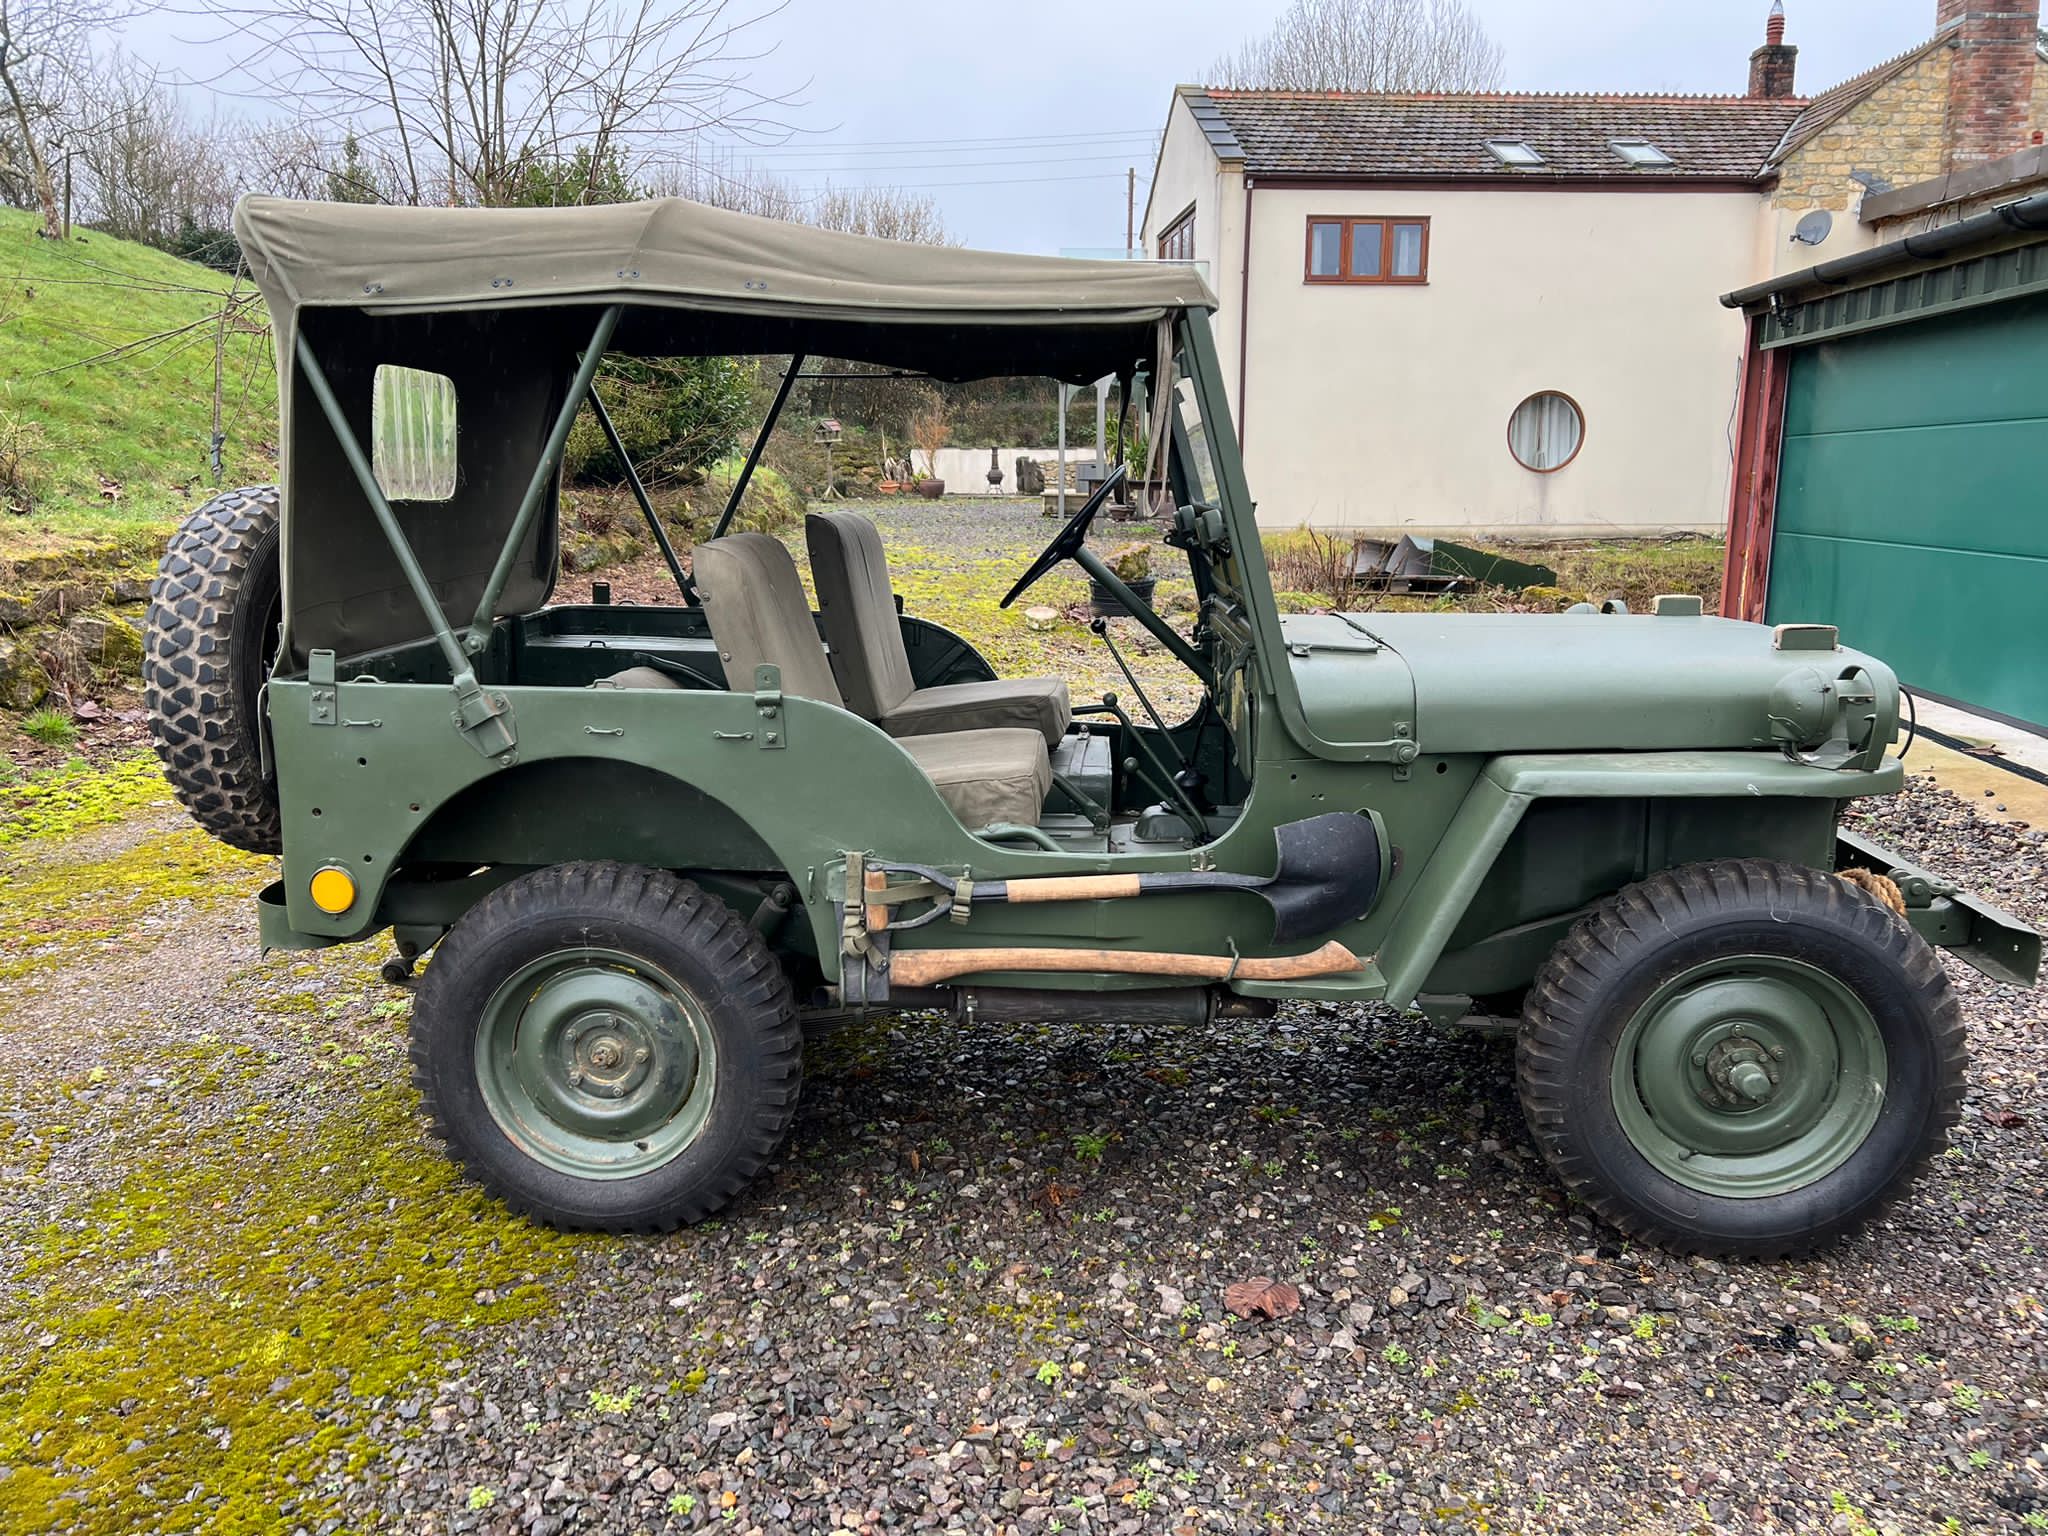 Willys Jeep Model M38 c1947 - Image 2 of 13